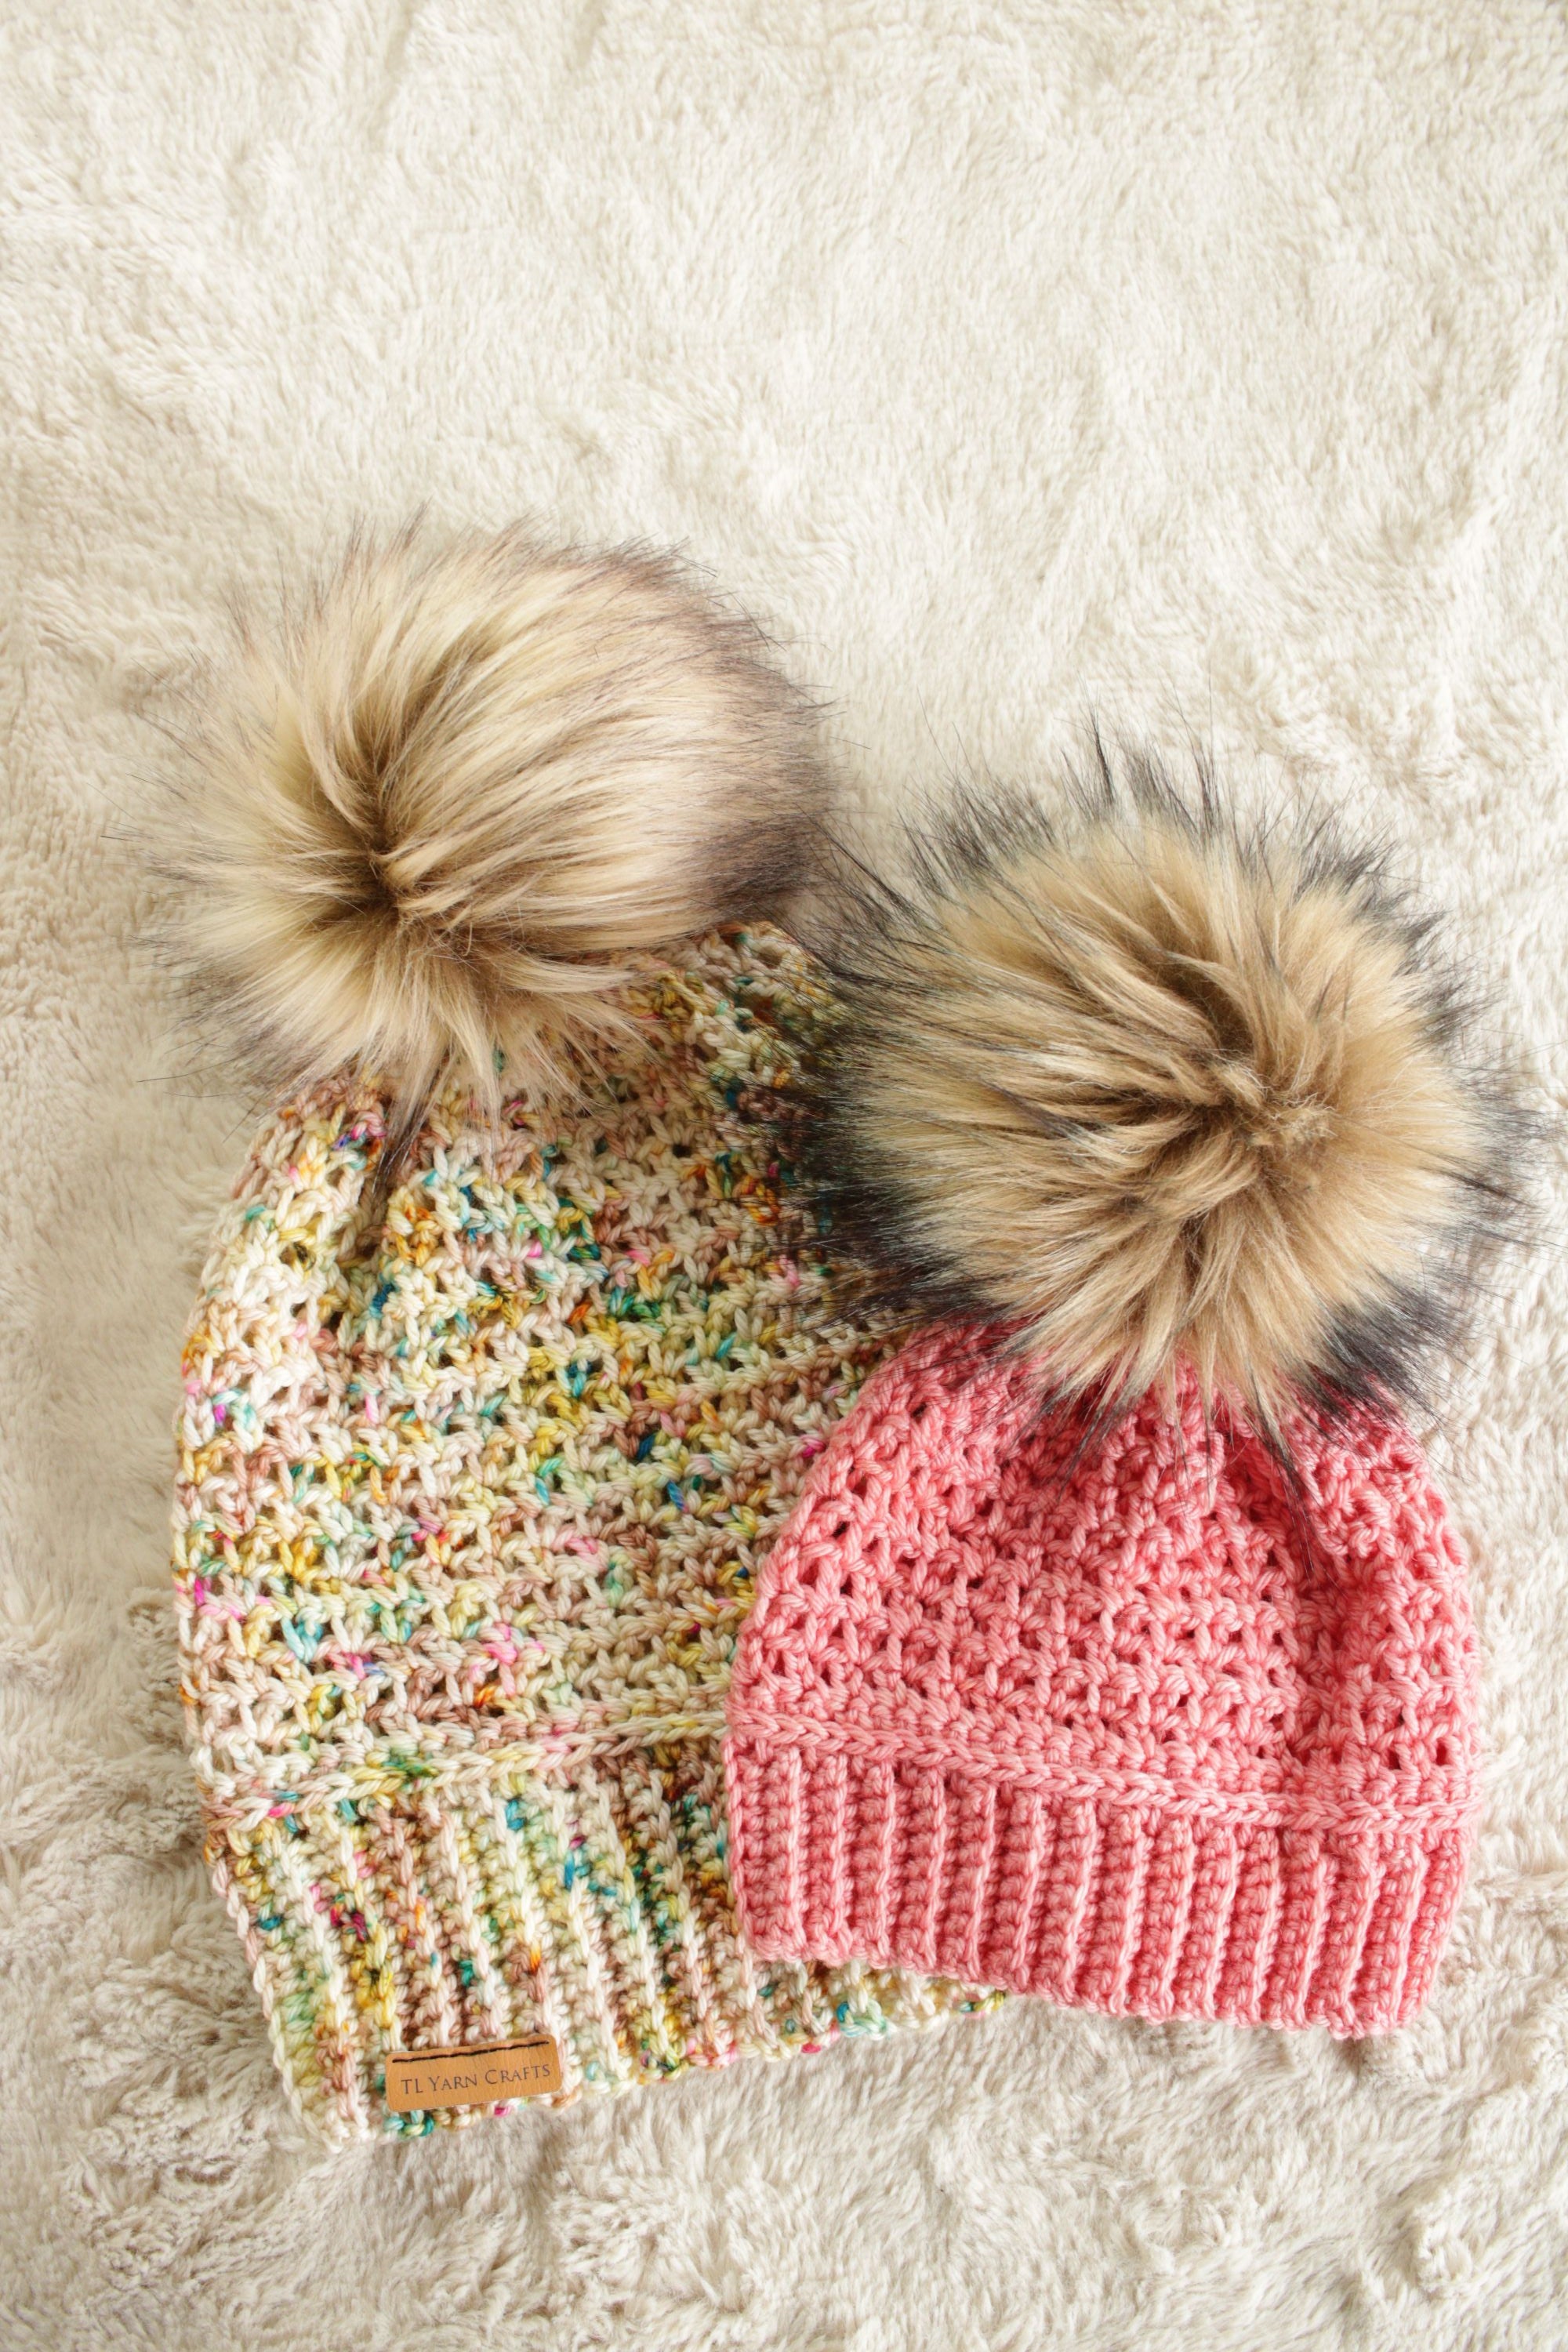 An Easy Beanie Crochet Pattern You Can Make For The Whole Family